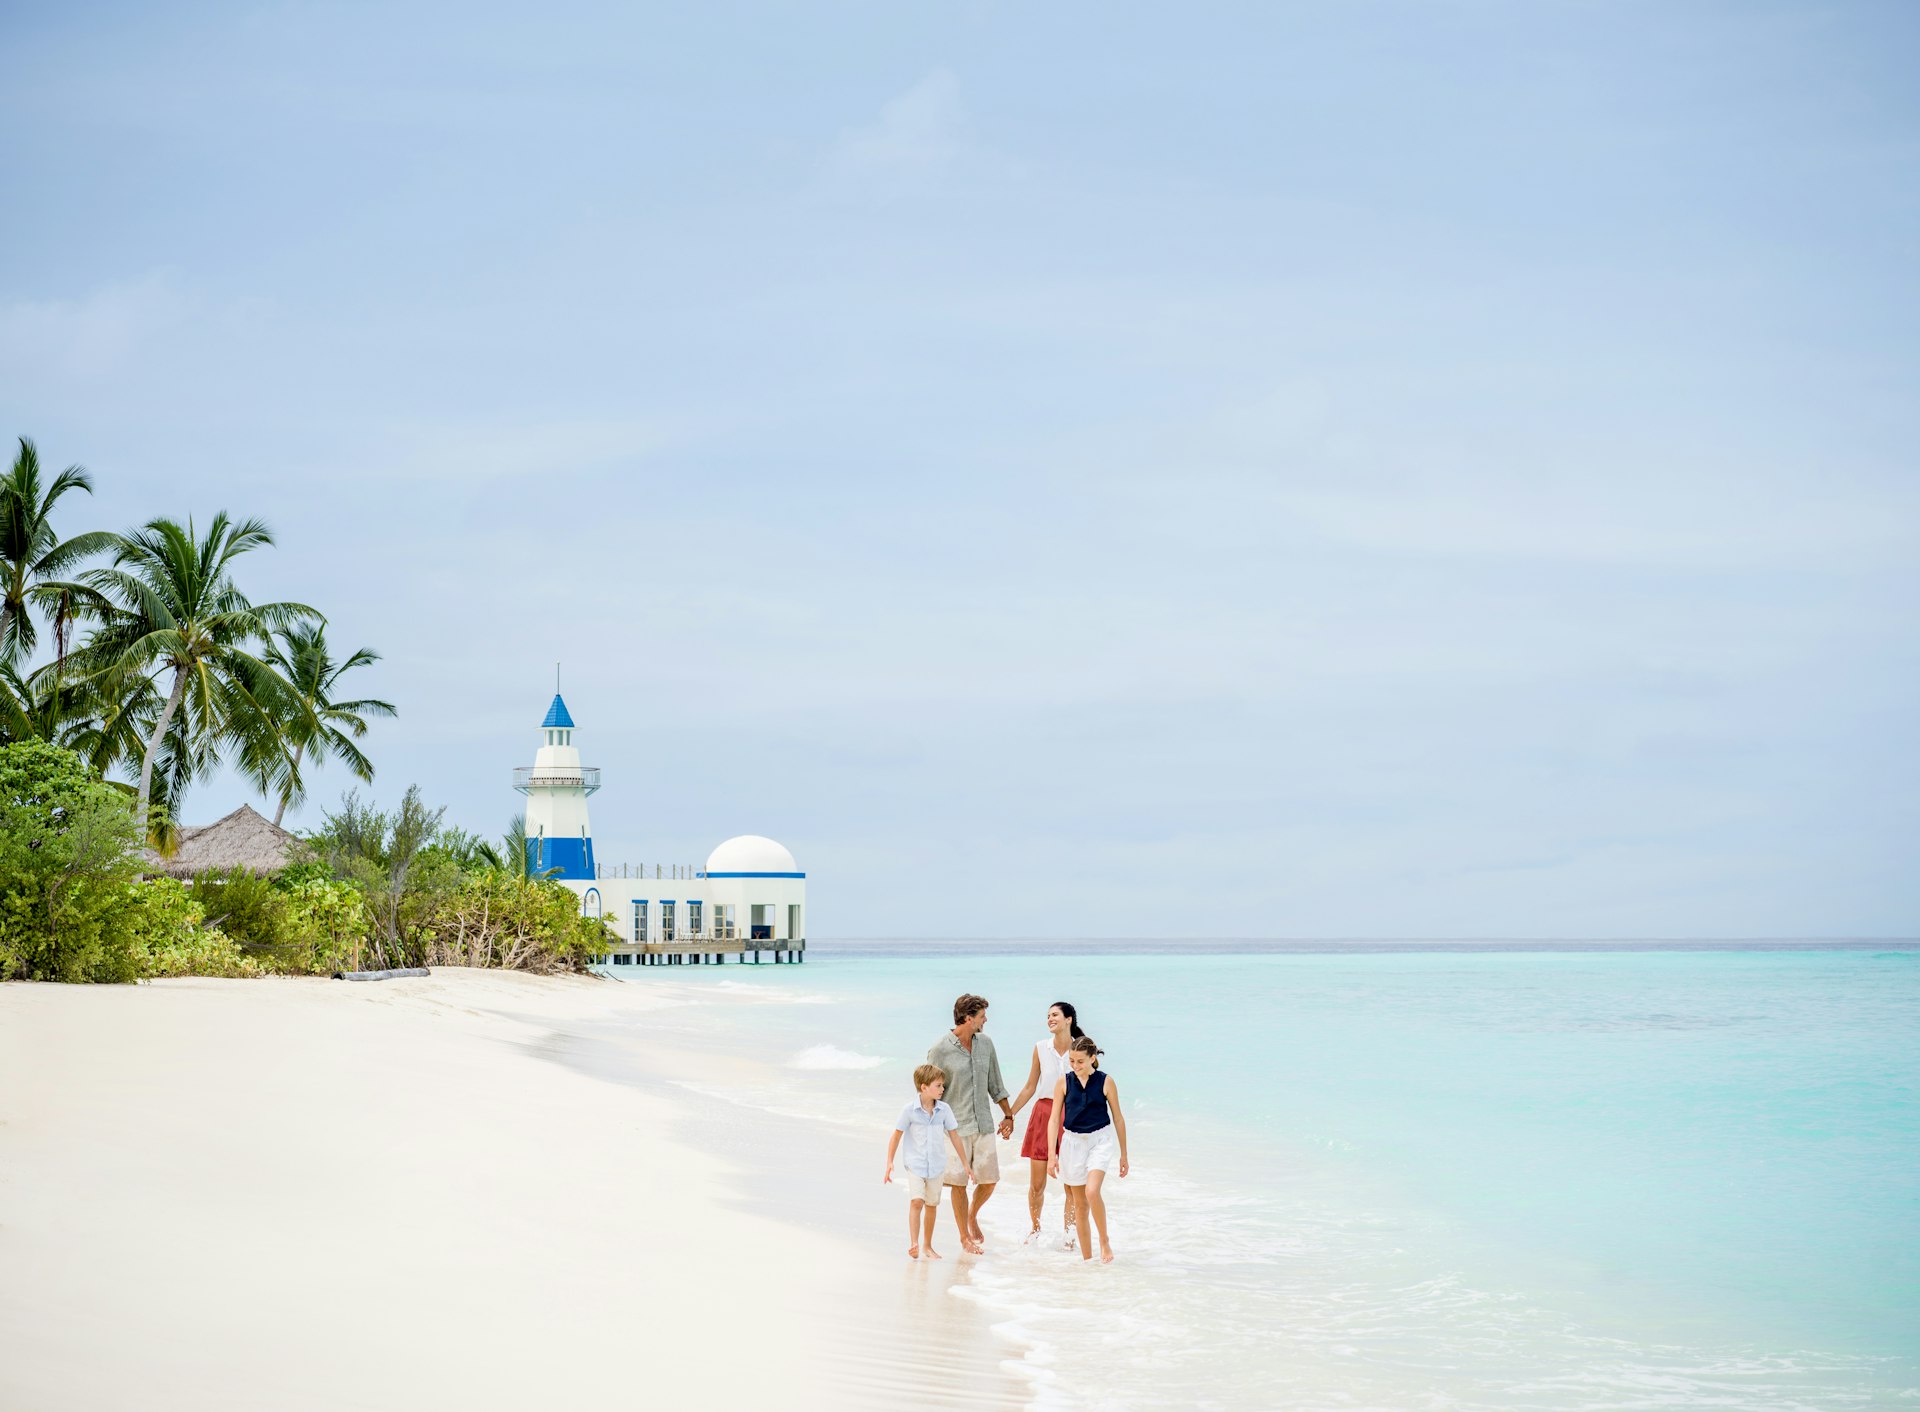 A family on the beach walk in front of the lighthouse at InterContinental Maldives Maamunagau Resort, the Maldives